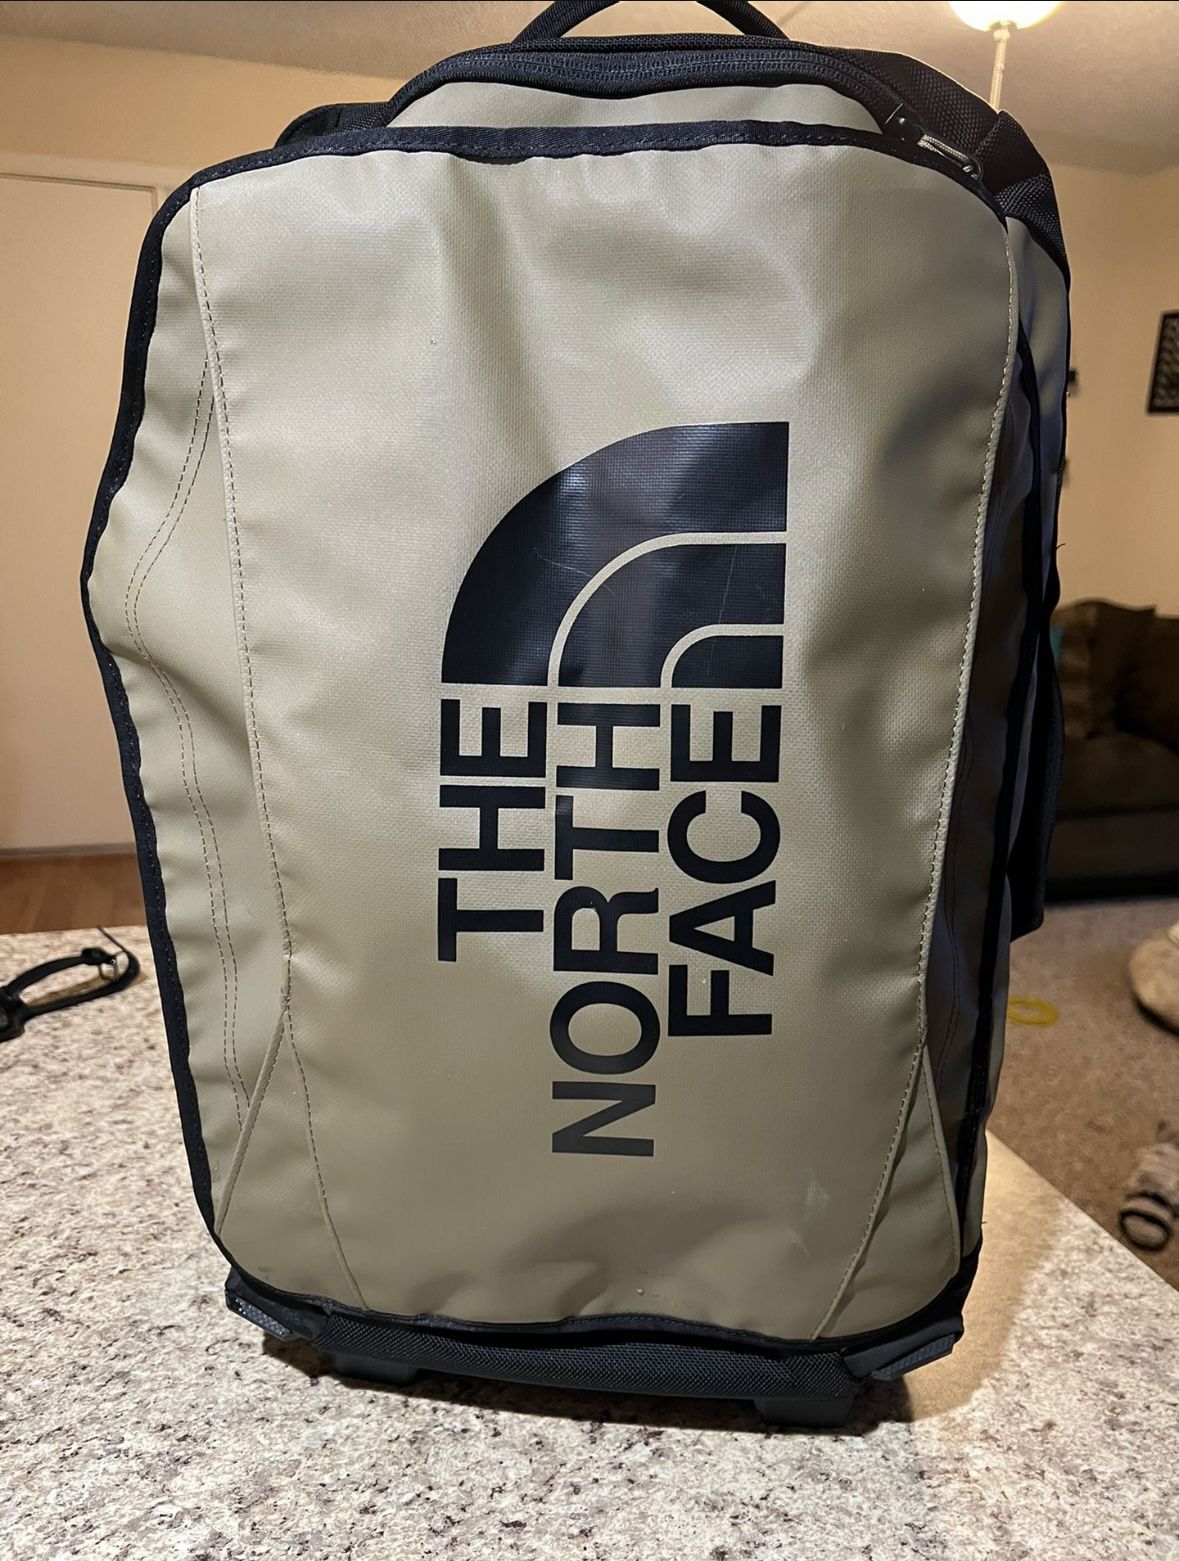 scheerapparaat Berg Post The North Face Rolling Thunder 22” Luggage Carryon for Sale in Belle Isle,  FL - OfferUp